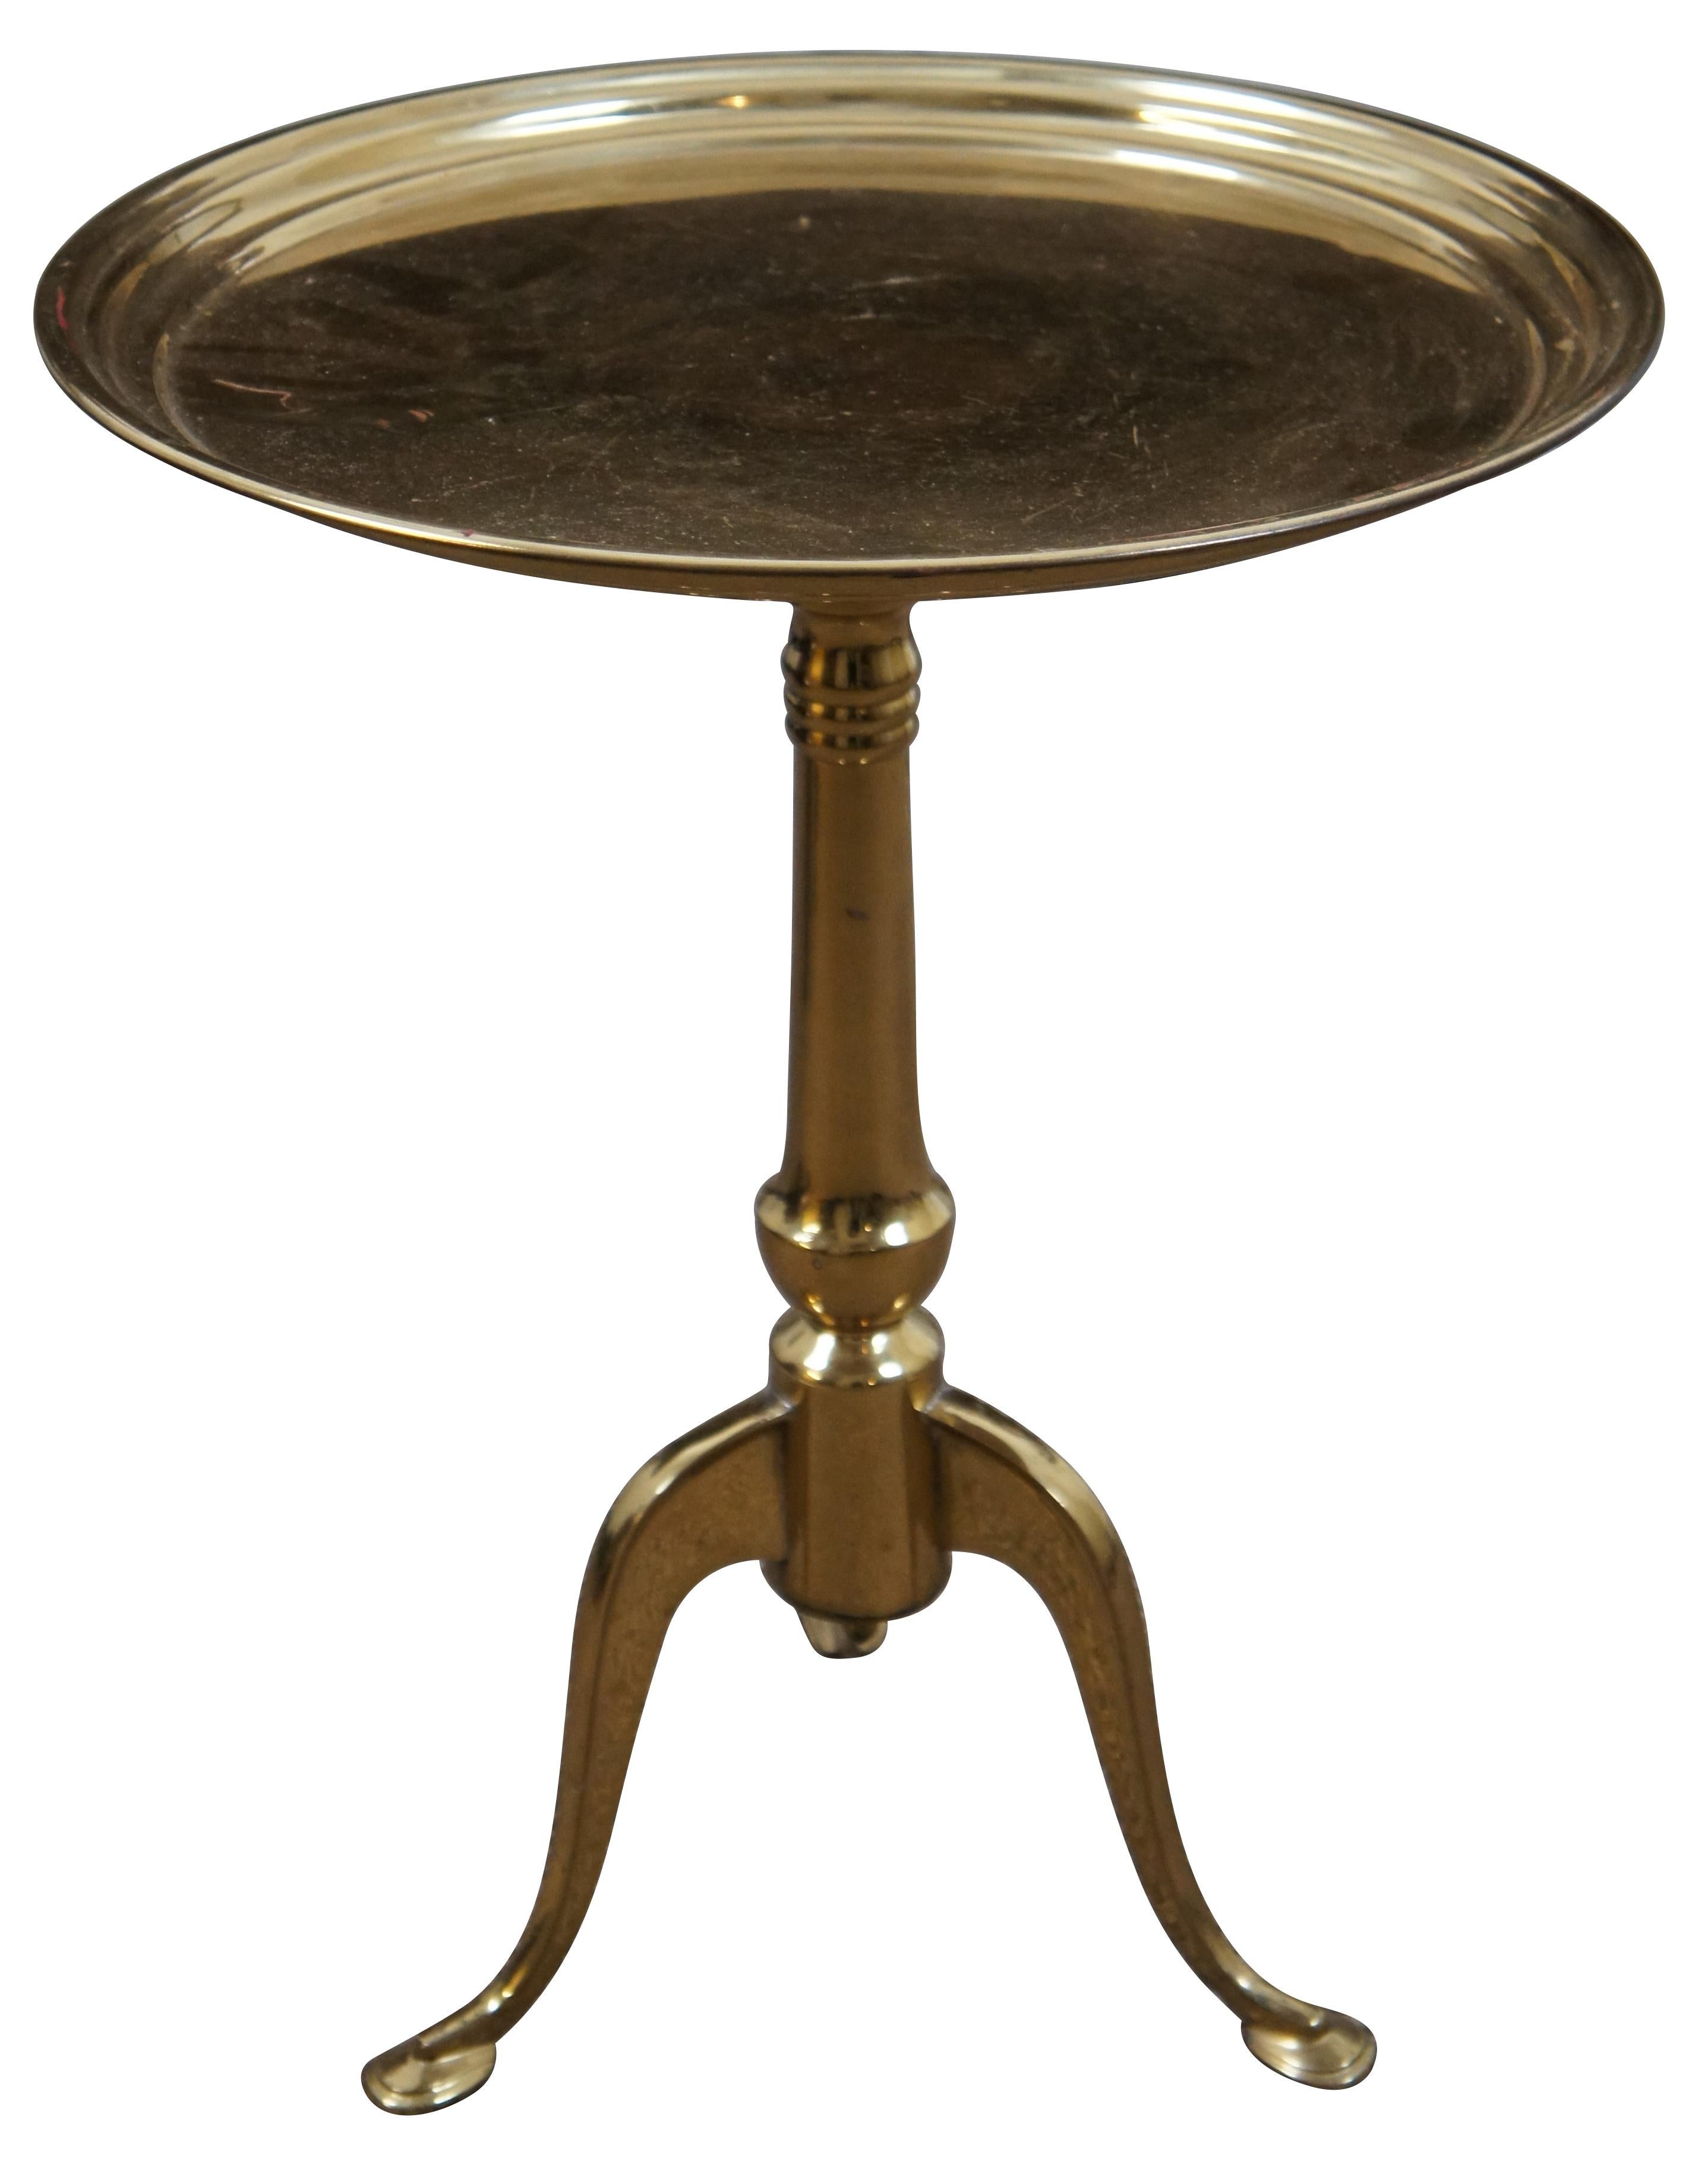 Queen Anne Vintage Round Brass Tripod Pedestal Plant Stand Side Accent Cocktail Table 19